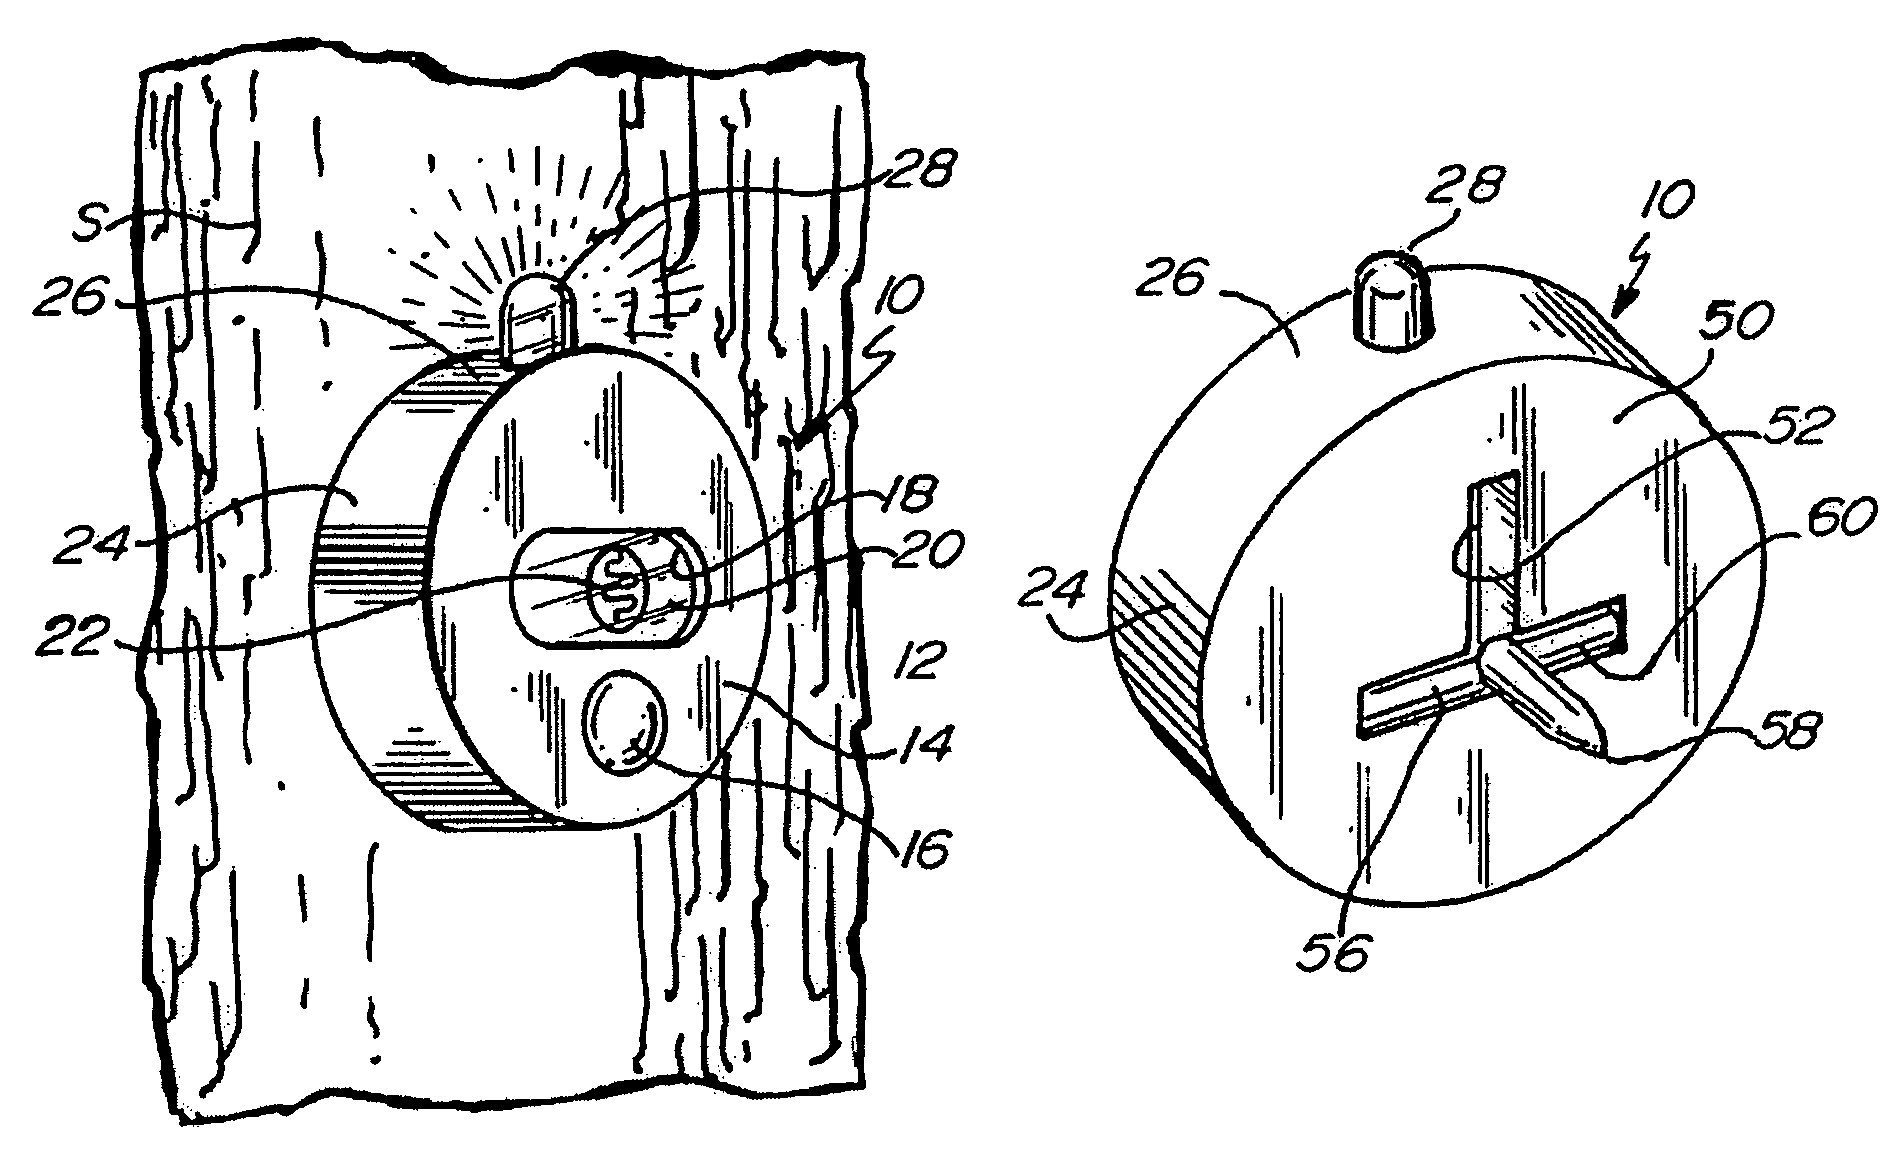 Identification and/or trail light